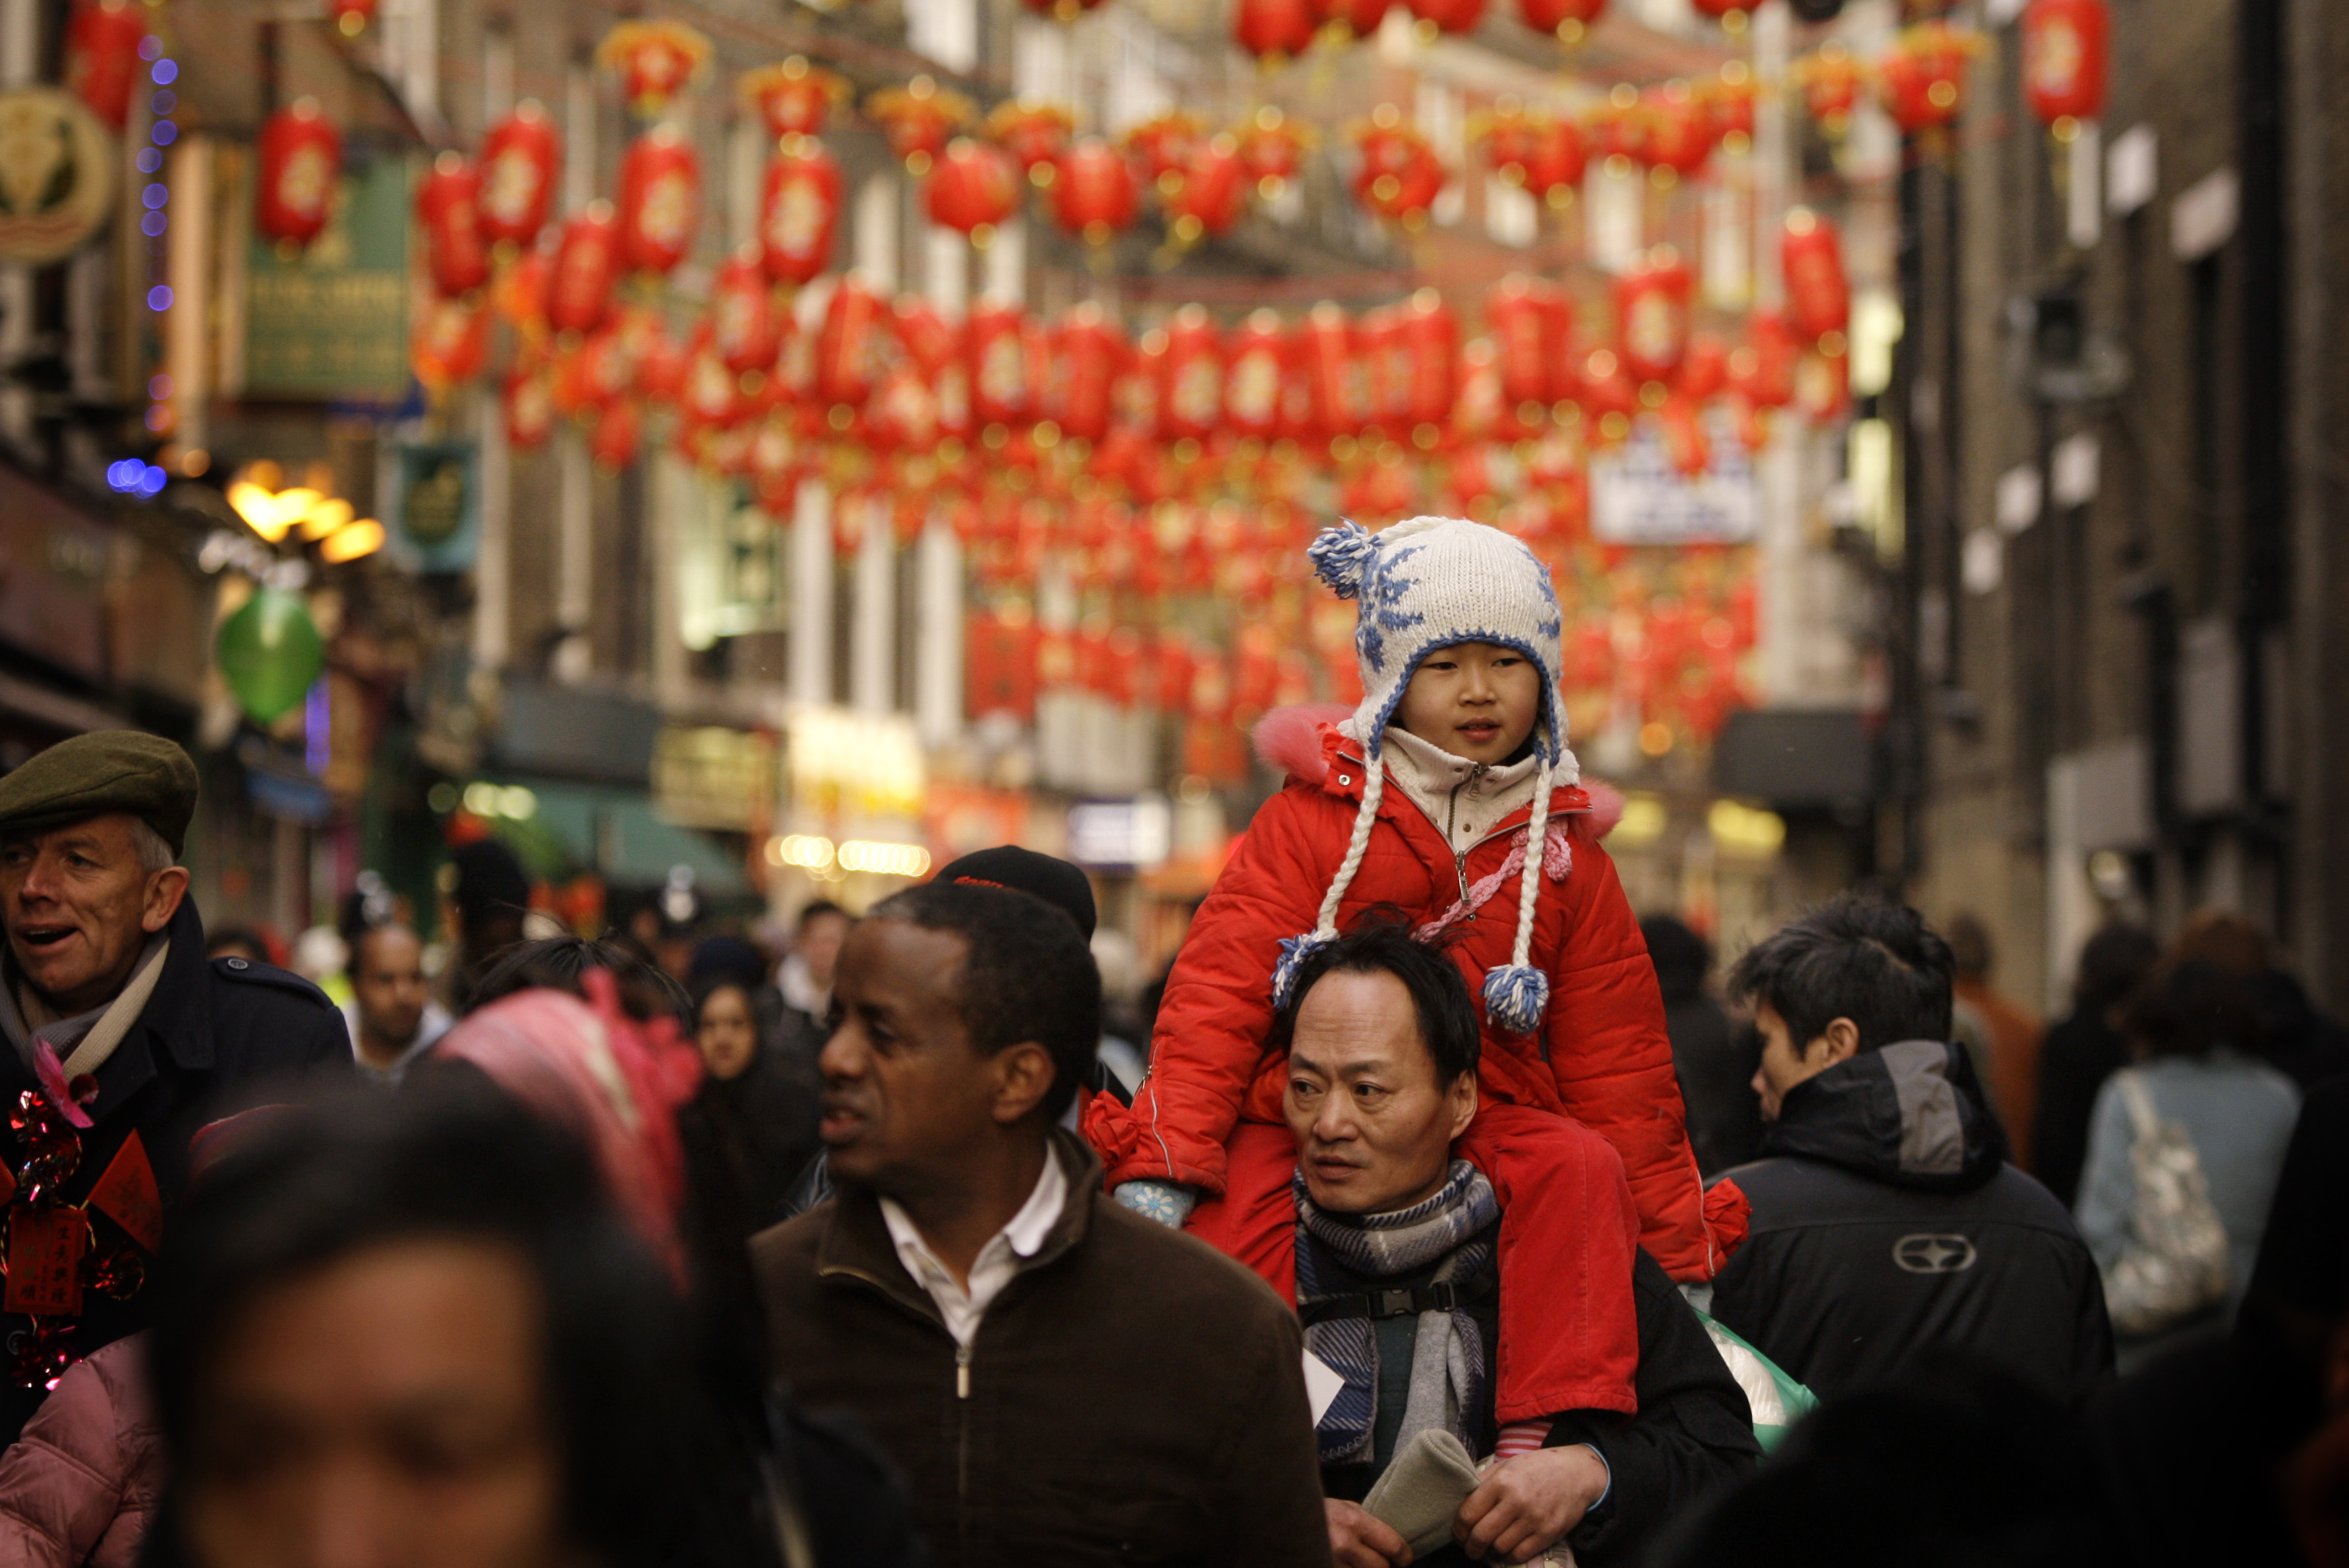 5 Places for international students to celebrate Chinese New Year this 2017